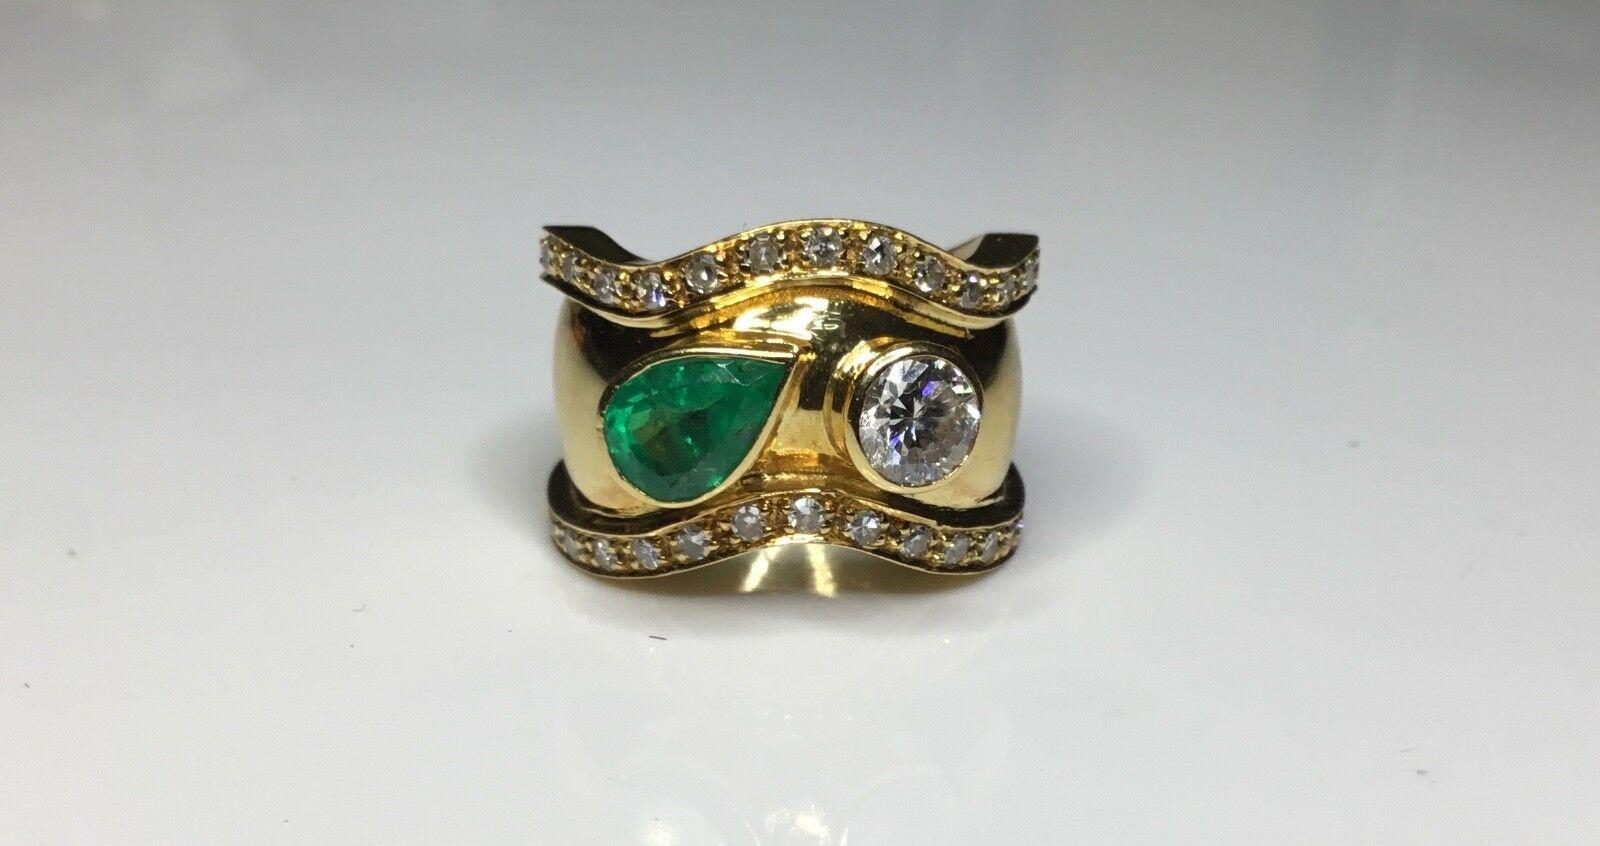 Estate 18K Yellow Gold 2.15 CTW Natural Colombian Emerald & Diamond Ring Sz 6

One Pear Shaped Natural Colombian Emerald, Weighing Approximately 1.00 Carat Total Weight.

One Round Brilliant Cut Natural Diamond, Weighing Approximately 0.65 Carat